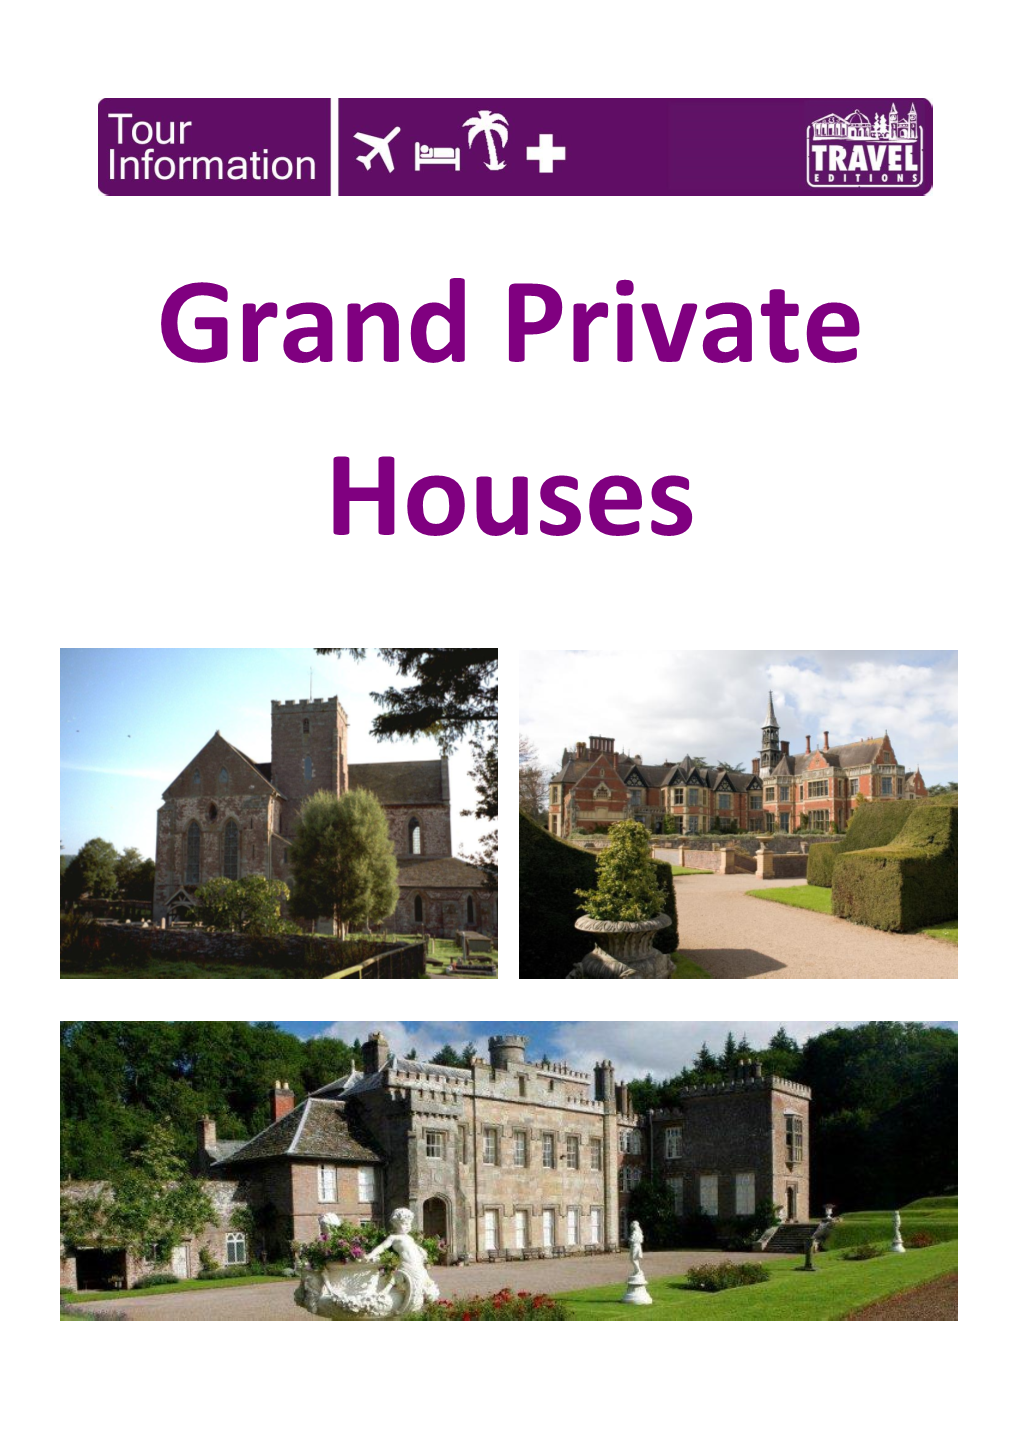 Grand Private Houses